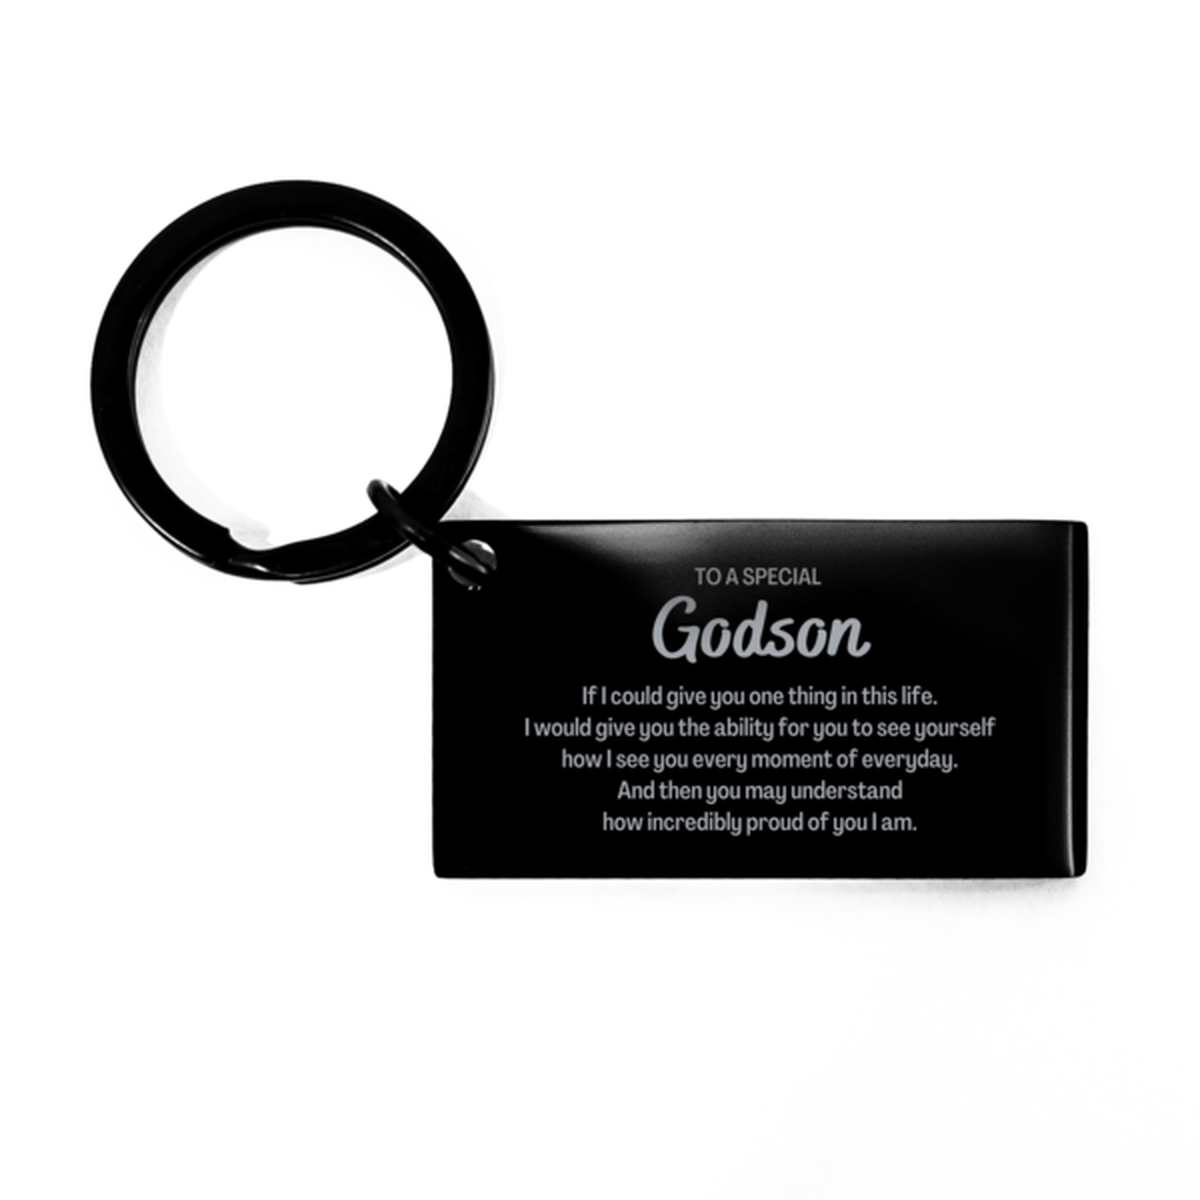 To My Godson Keychain, Gifts For Godson Engraved, Inspirational Gifts for Christmas Birthday, Epic Gifts for Godson To A Special Godson how incredibly proud of you I am